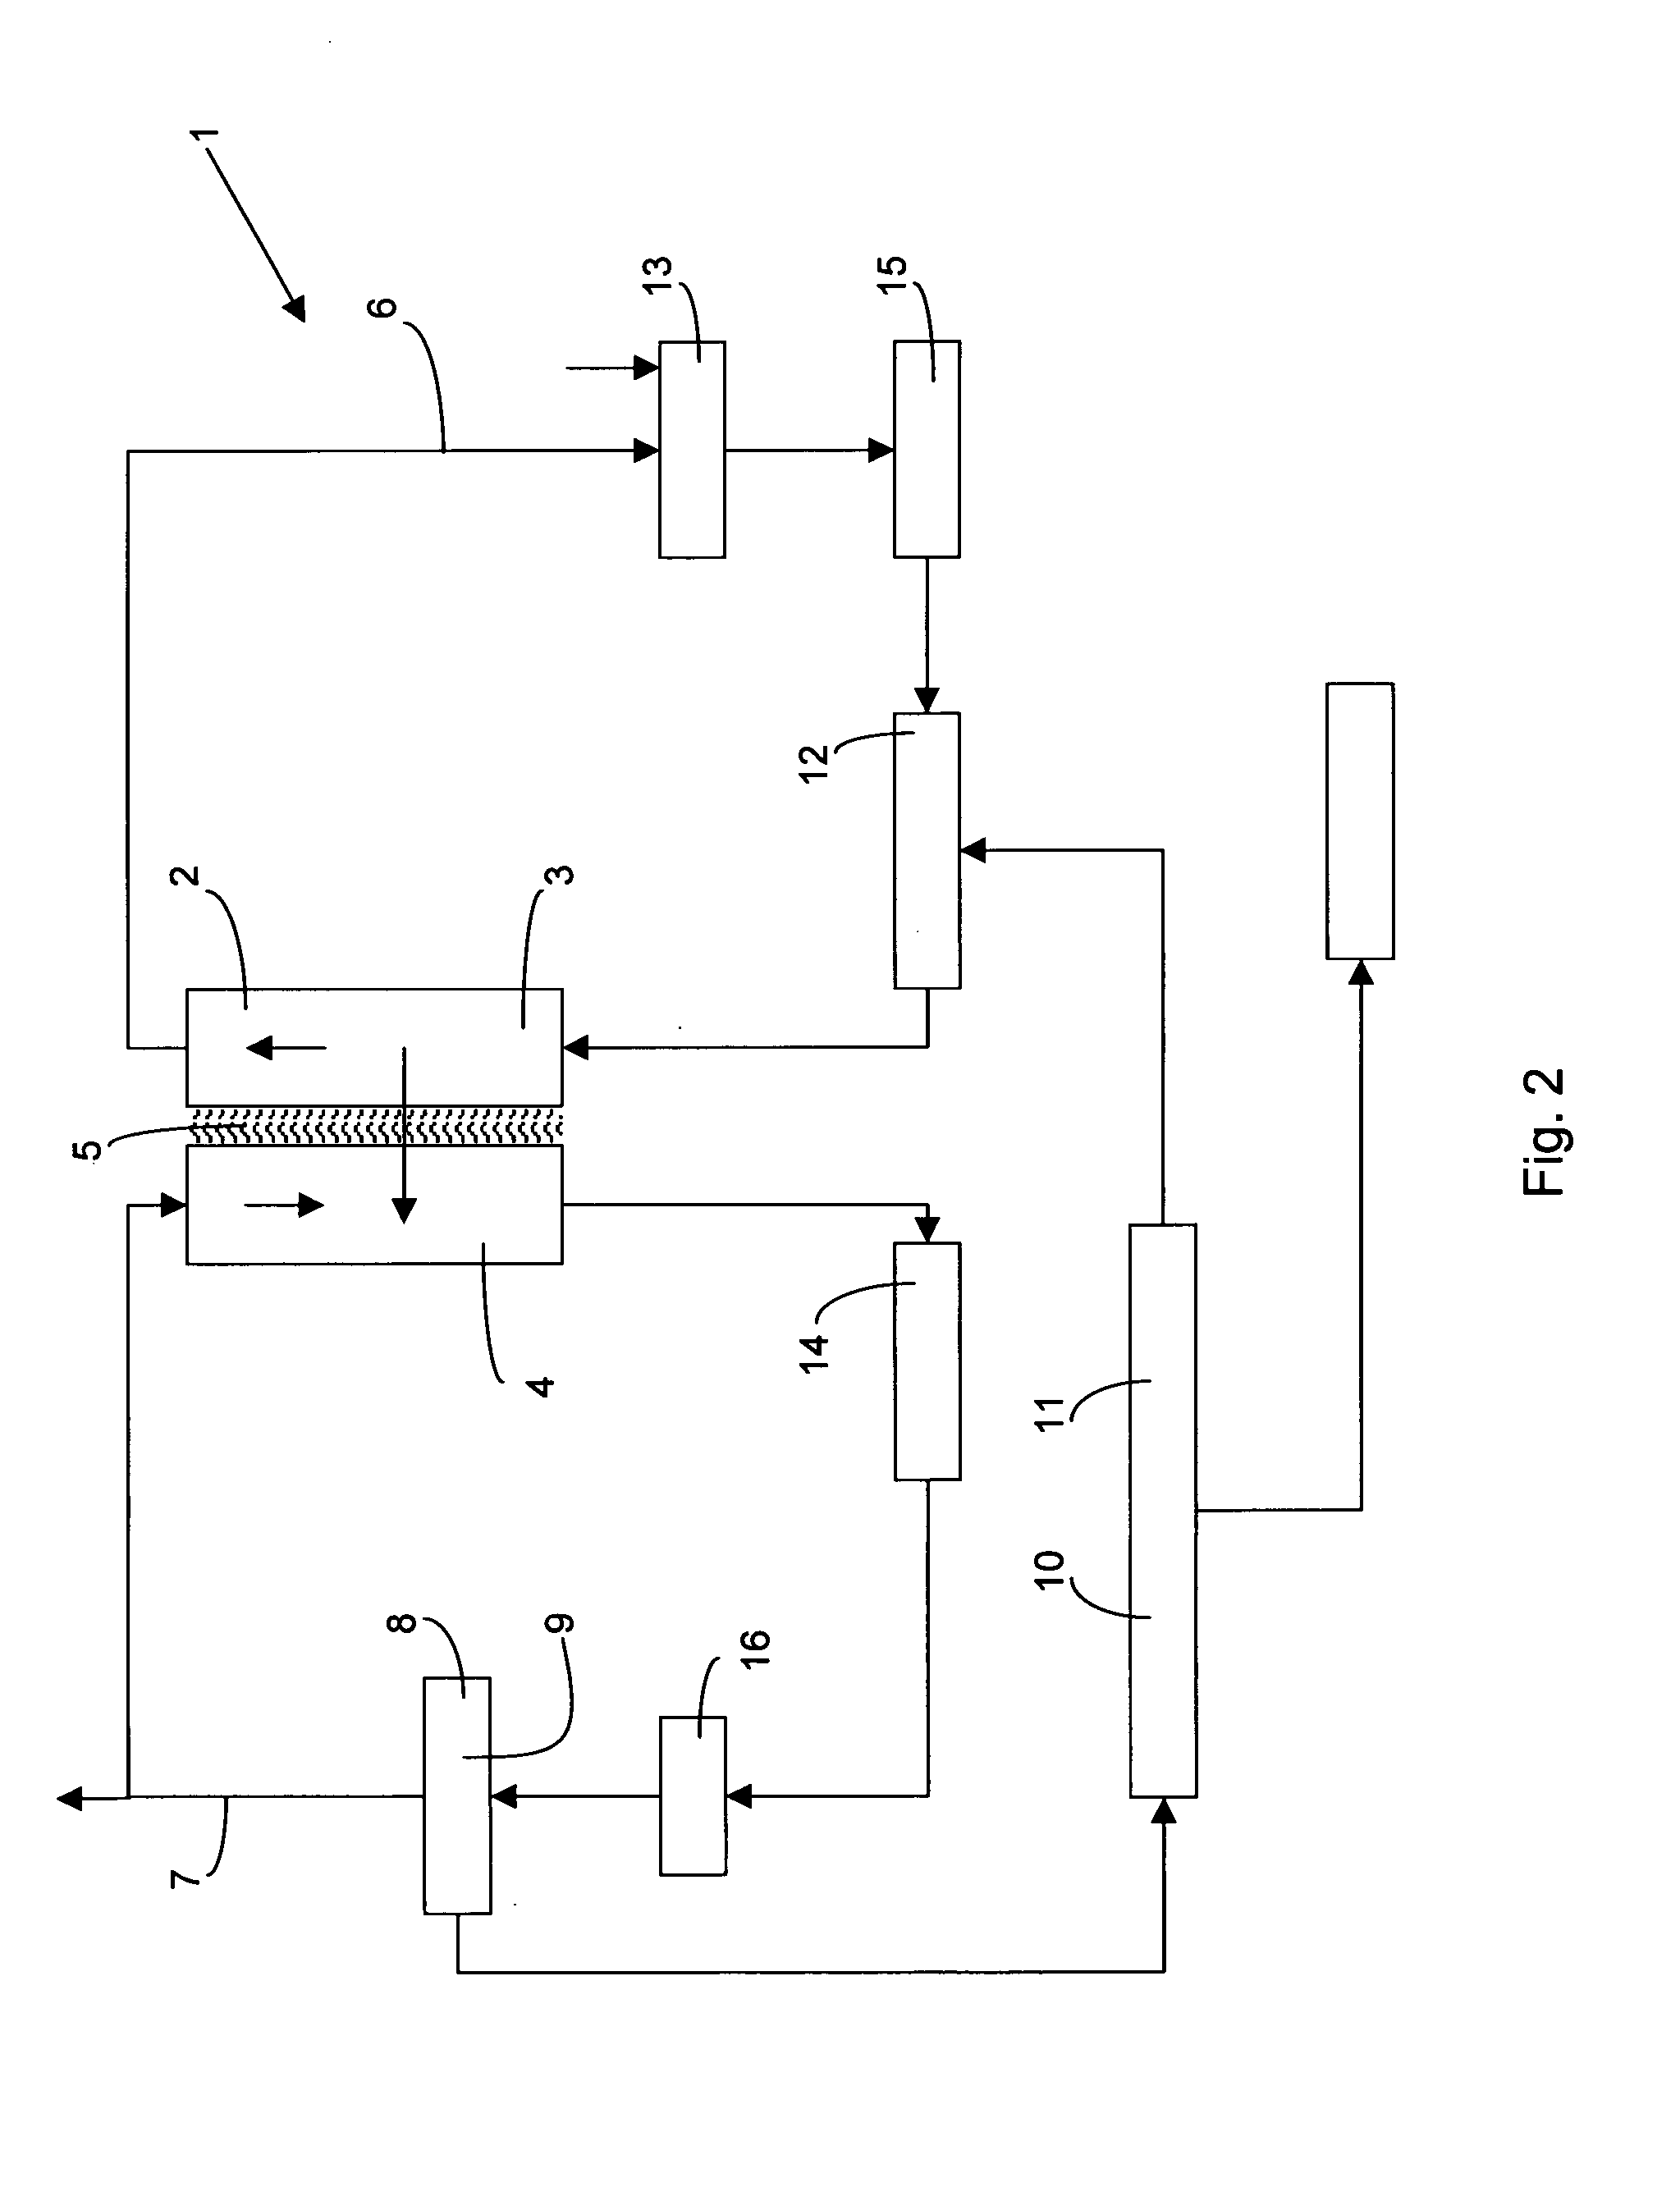 Apparatus and Method for Concentrating A Fluid